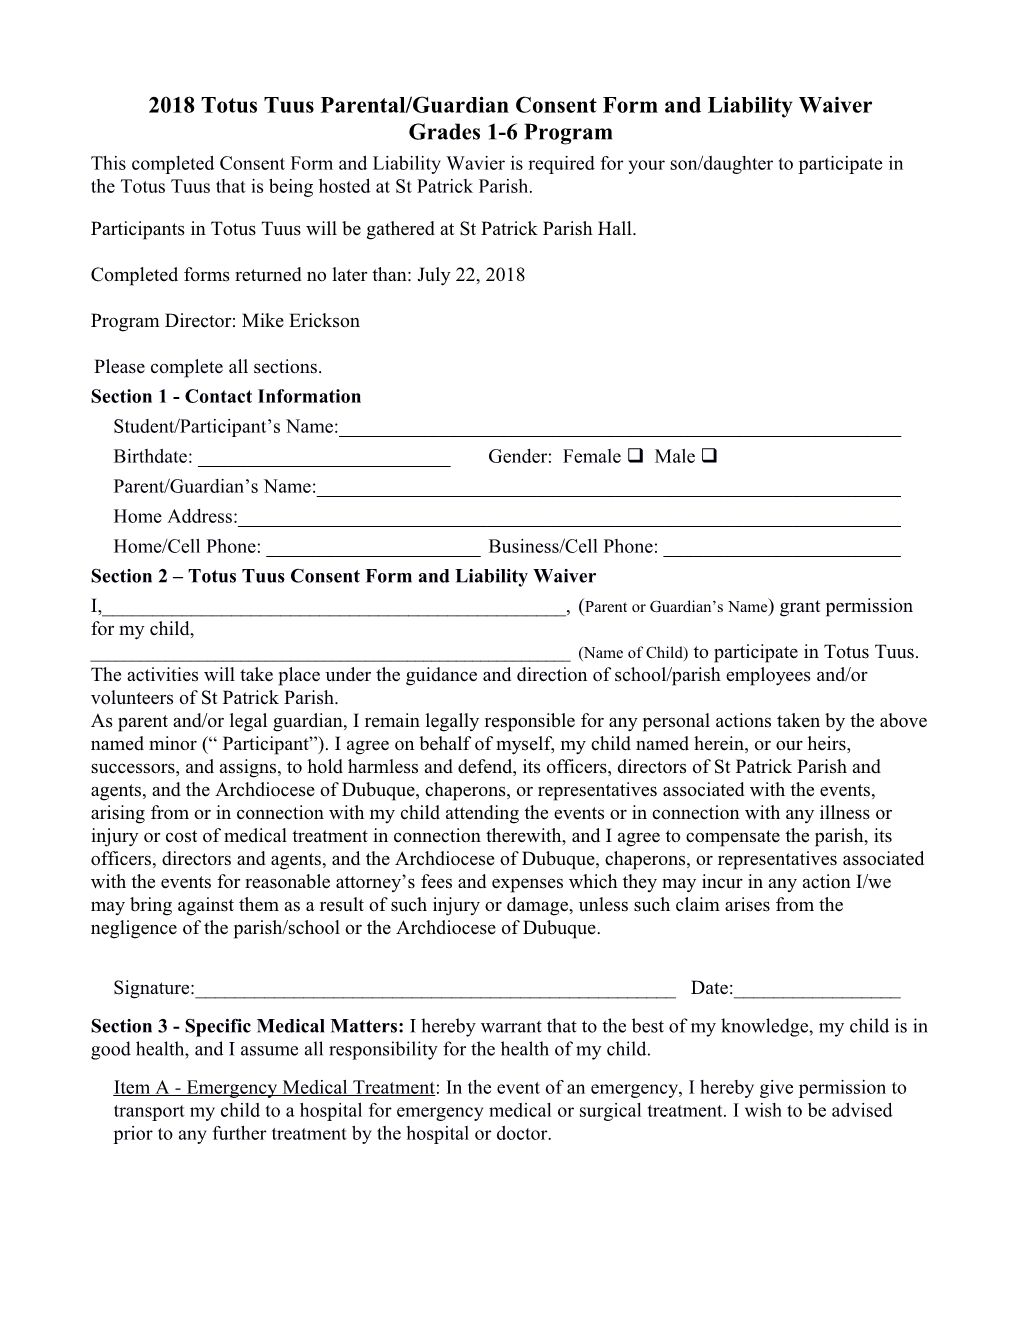 2018 Totus Tuus Parental/Guardian Consent Form and Liability Waiver